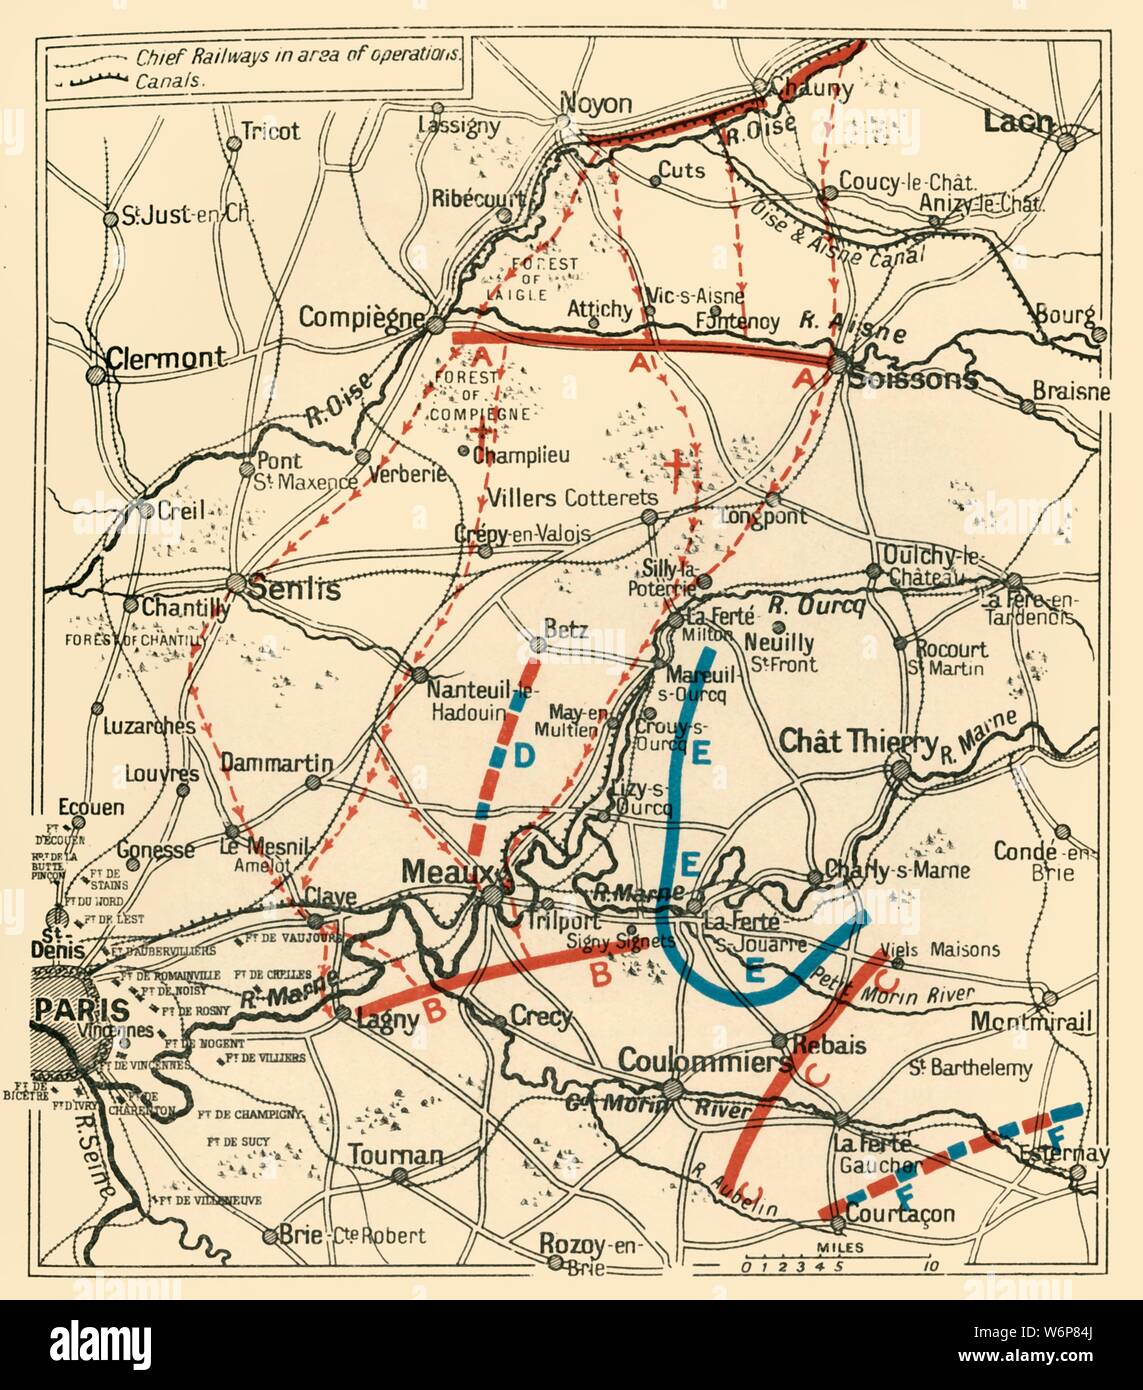 'The Second Phase of the Great Retreat: Plan Showing the British Positions from August 28 to September 6, 1914', 1920. 'The map also indicates the positions of the Allies and of the German army under General von Kluck at the beginning of the Battle of the Marne'. Map of northern France, showing battle lines during the First World War. From &quot;The Great World War - A History&quot; Volume I, edited by Frank A Mumby. [The Gresham Publishing Company Ltd, London, c1920] Stock Photo